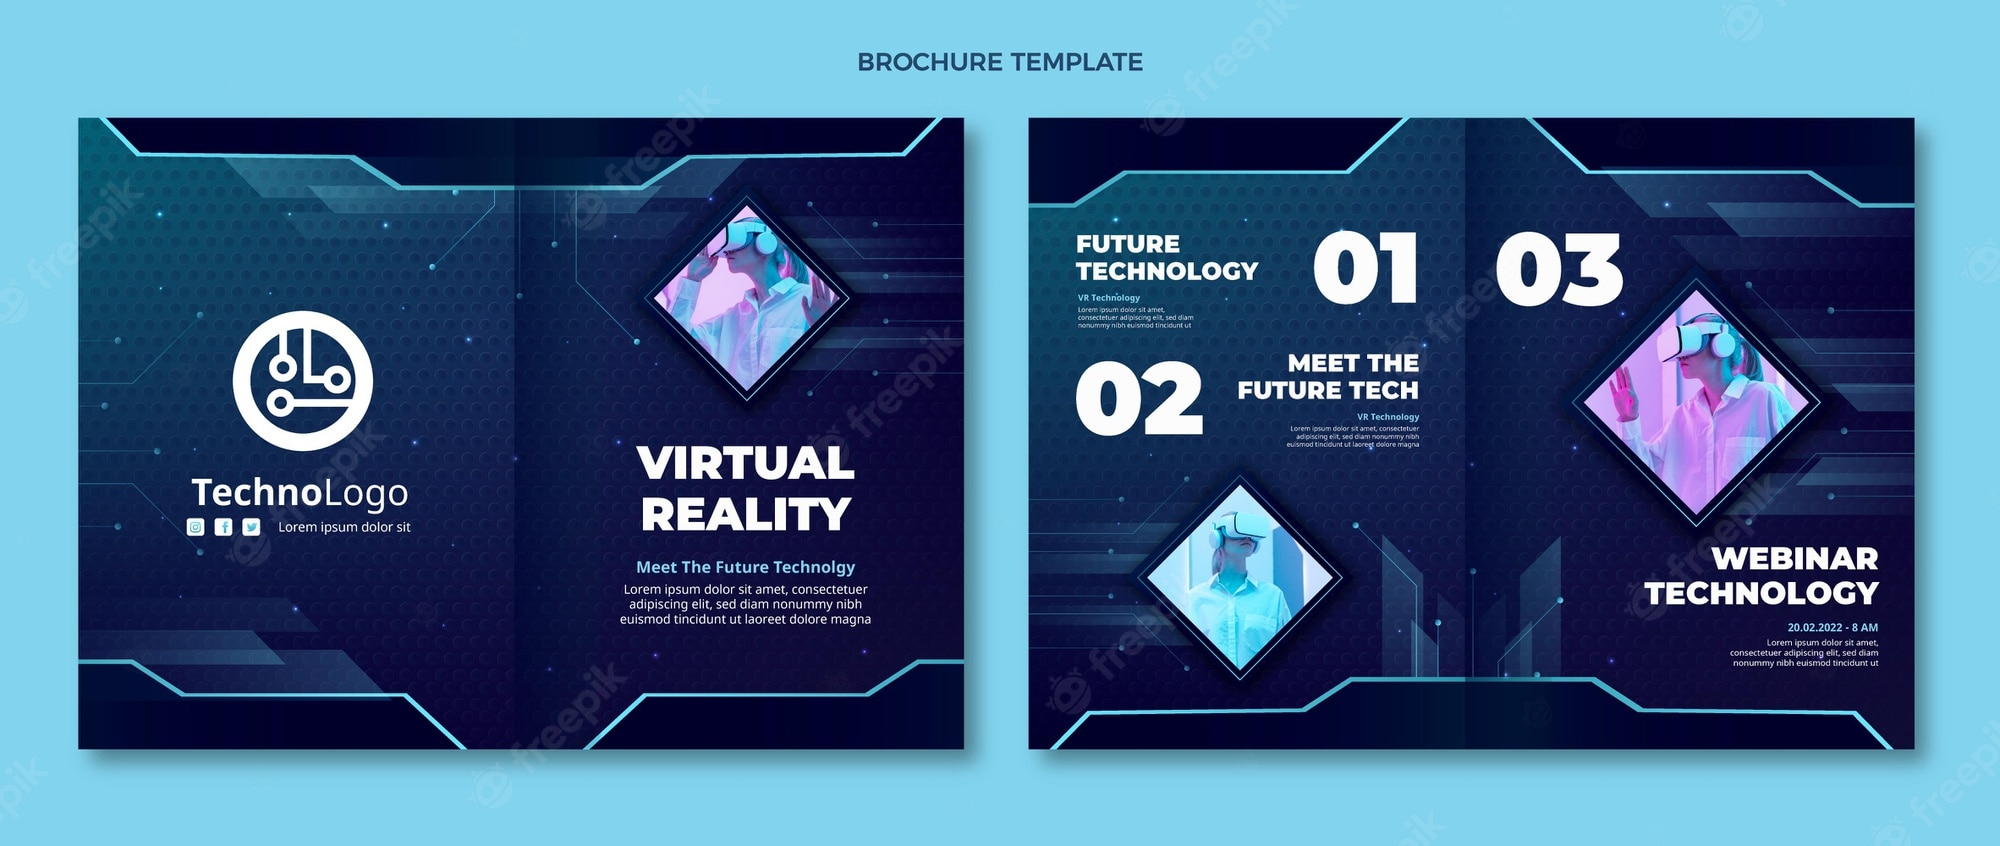 Technology brochure template Images  Free Vectors, Stock Photos & PSD Pertaining To Technical Brochure Template